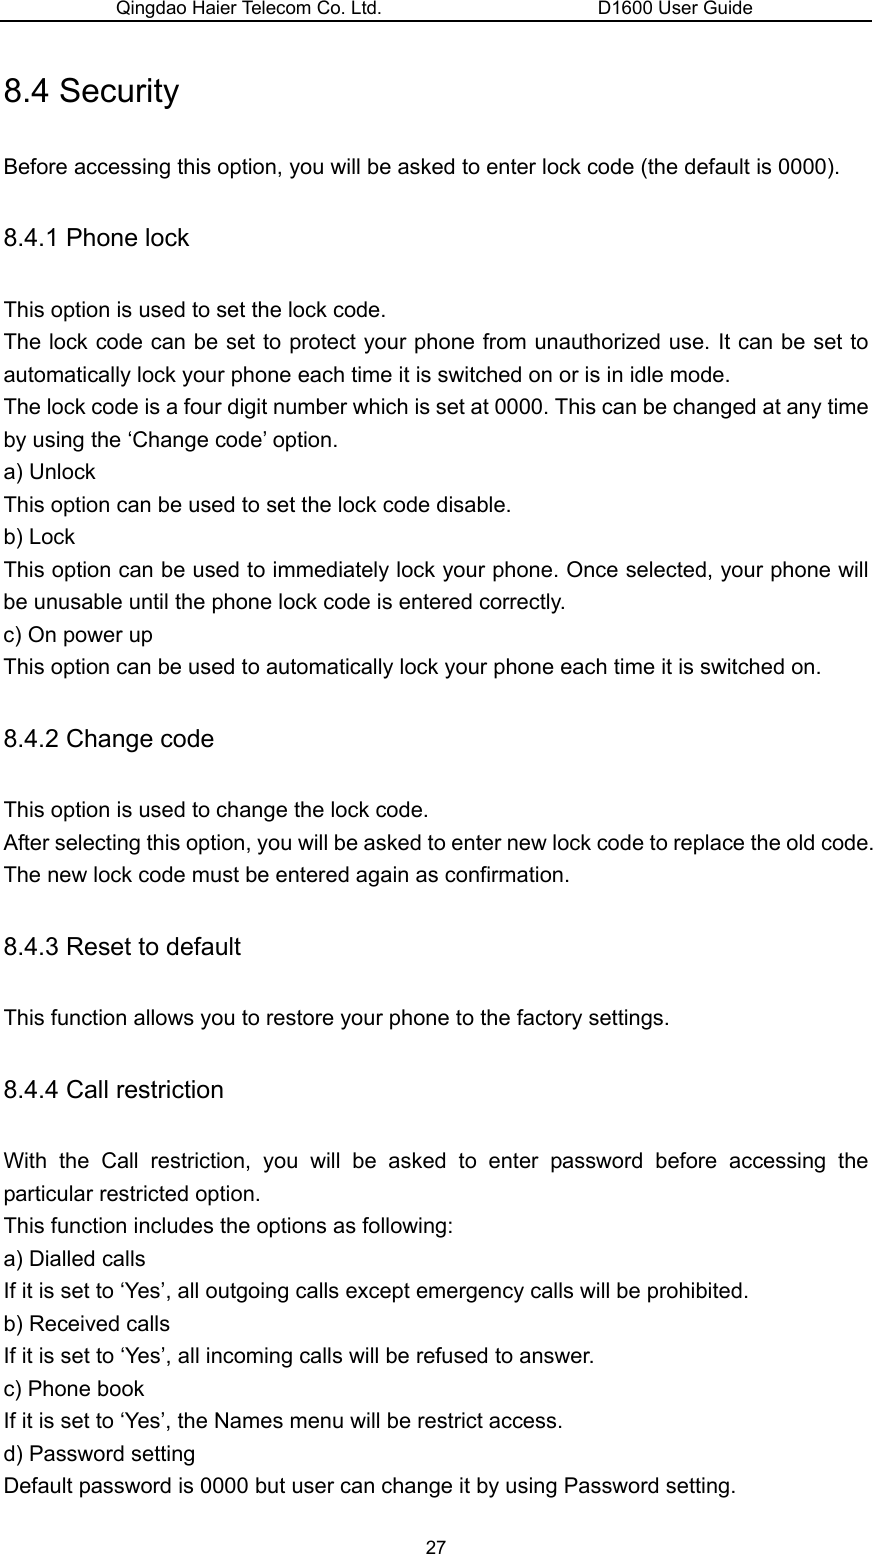 Qingdao Haier Telecom Co. Ltd.                       D1600 User Guide 8.4 Security Before accessing this option, you will be asked to enter lock code (the default is 0000). 8.4.1 Phone lock This option is used to set the lock code. The lock code can be set to protect your phone from unauthorized use. It can be set to automatically lock your phone each time it is switched on or is in idle mode. The lock code is a four digit number which is set at 0000. This can be changed at any time by using the ‘Change code’ option. a) Unlock This option can be used to set the lock code disable. b) Lock This option can be used to immediately lock your phone. Once selected, your phone will be unusable until the phone lock code is entered correctly. c) On power up This option can be used to automatically lock your phone each time it is switched on. 8.4.2 Change code This option is used to change the lock code. After selecting this option, you will be asked to enter new lock code to replace the old code. The new lock code must be entered again as confirmation. 8.4.3 Reset to default This function allows you to restore your phone to the factory settings. 8.4.4 Call restriction With the Call restriction, you will be asked to enter password before accessing the particular restricted option. This function includes the options as following: a) Dialled calls If it is set to ‘Yes’, all outgoing calls except emergency calls will be prohibited. b) Received calls If it is set to ‘Yes’, all incoming calls will be refused to answer. c) Phone book If it is set to ‘Yes’, the Names menu will be restrict access. d) Password setting Default password is 0000 but user can change it by using Password setting.   27 